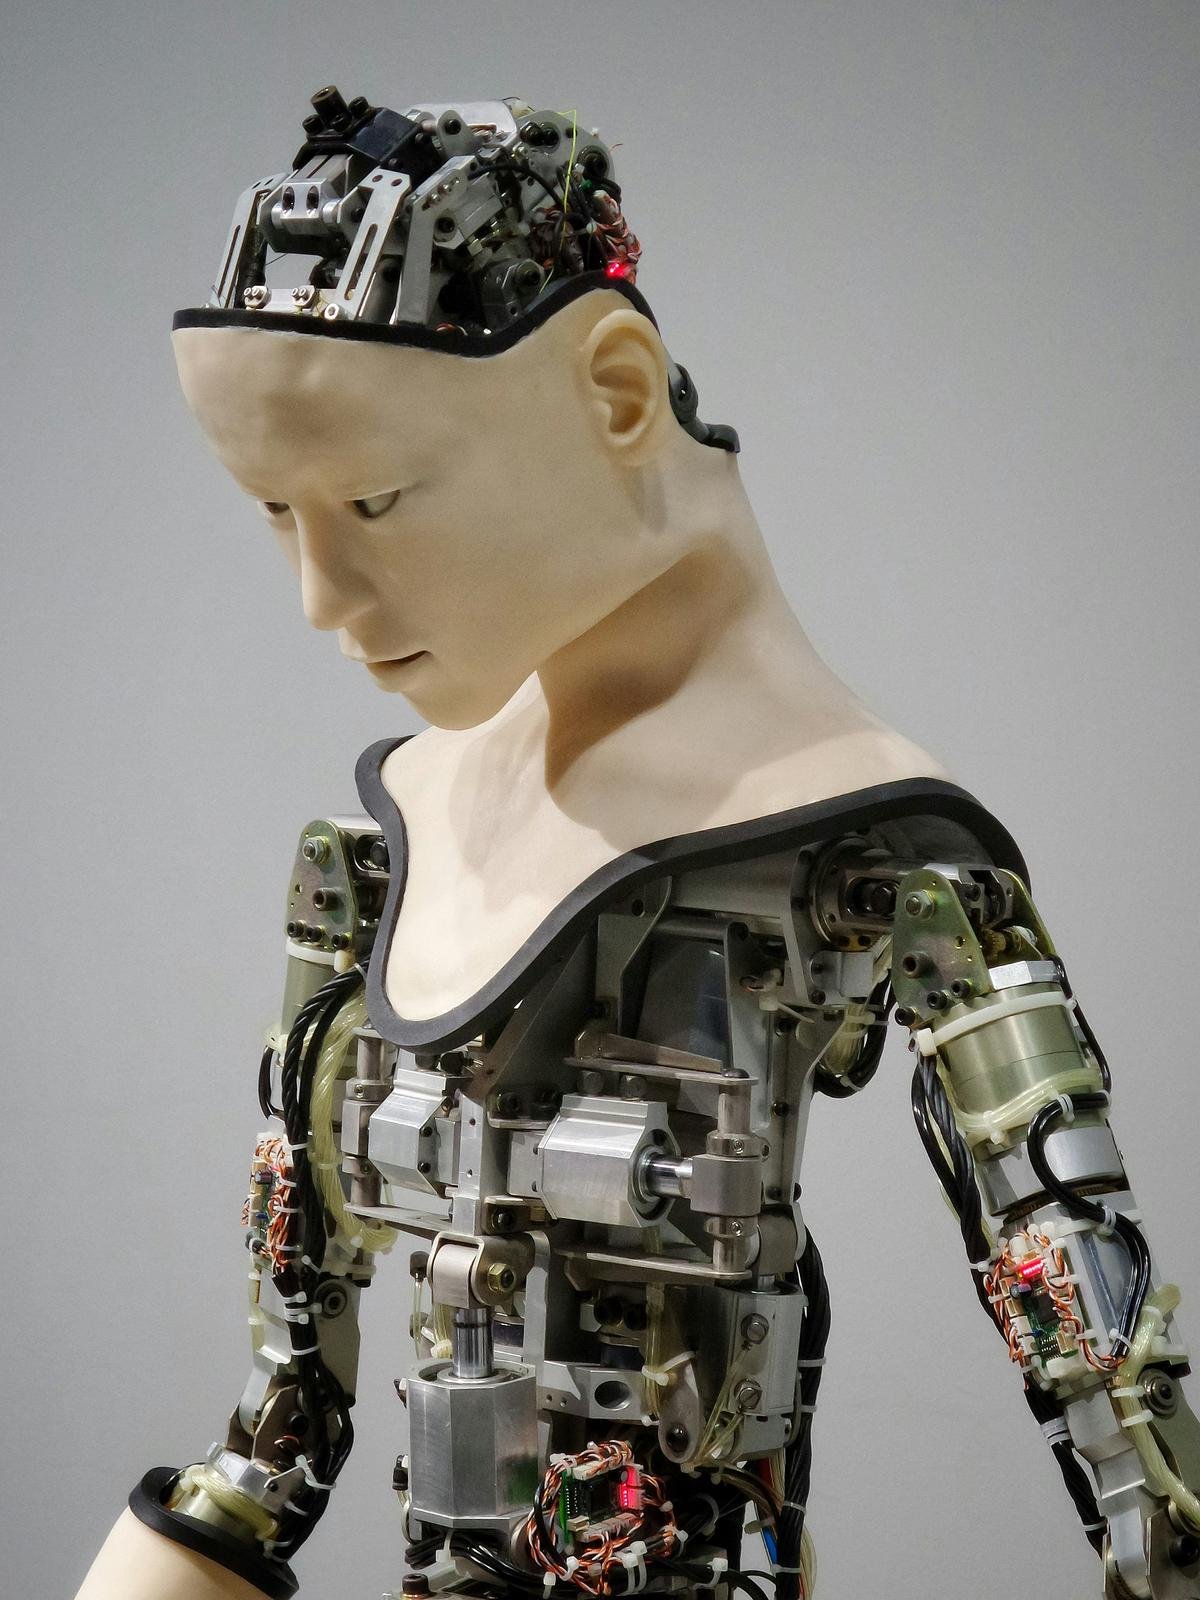 Image representing the future of AutoGPT, showing a blend of human and artificial intelligence working together